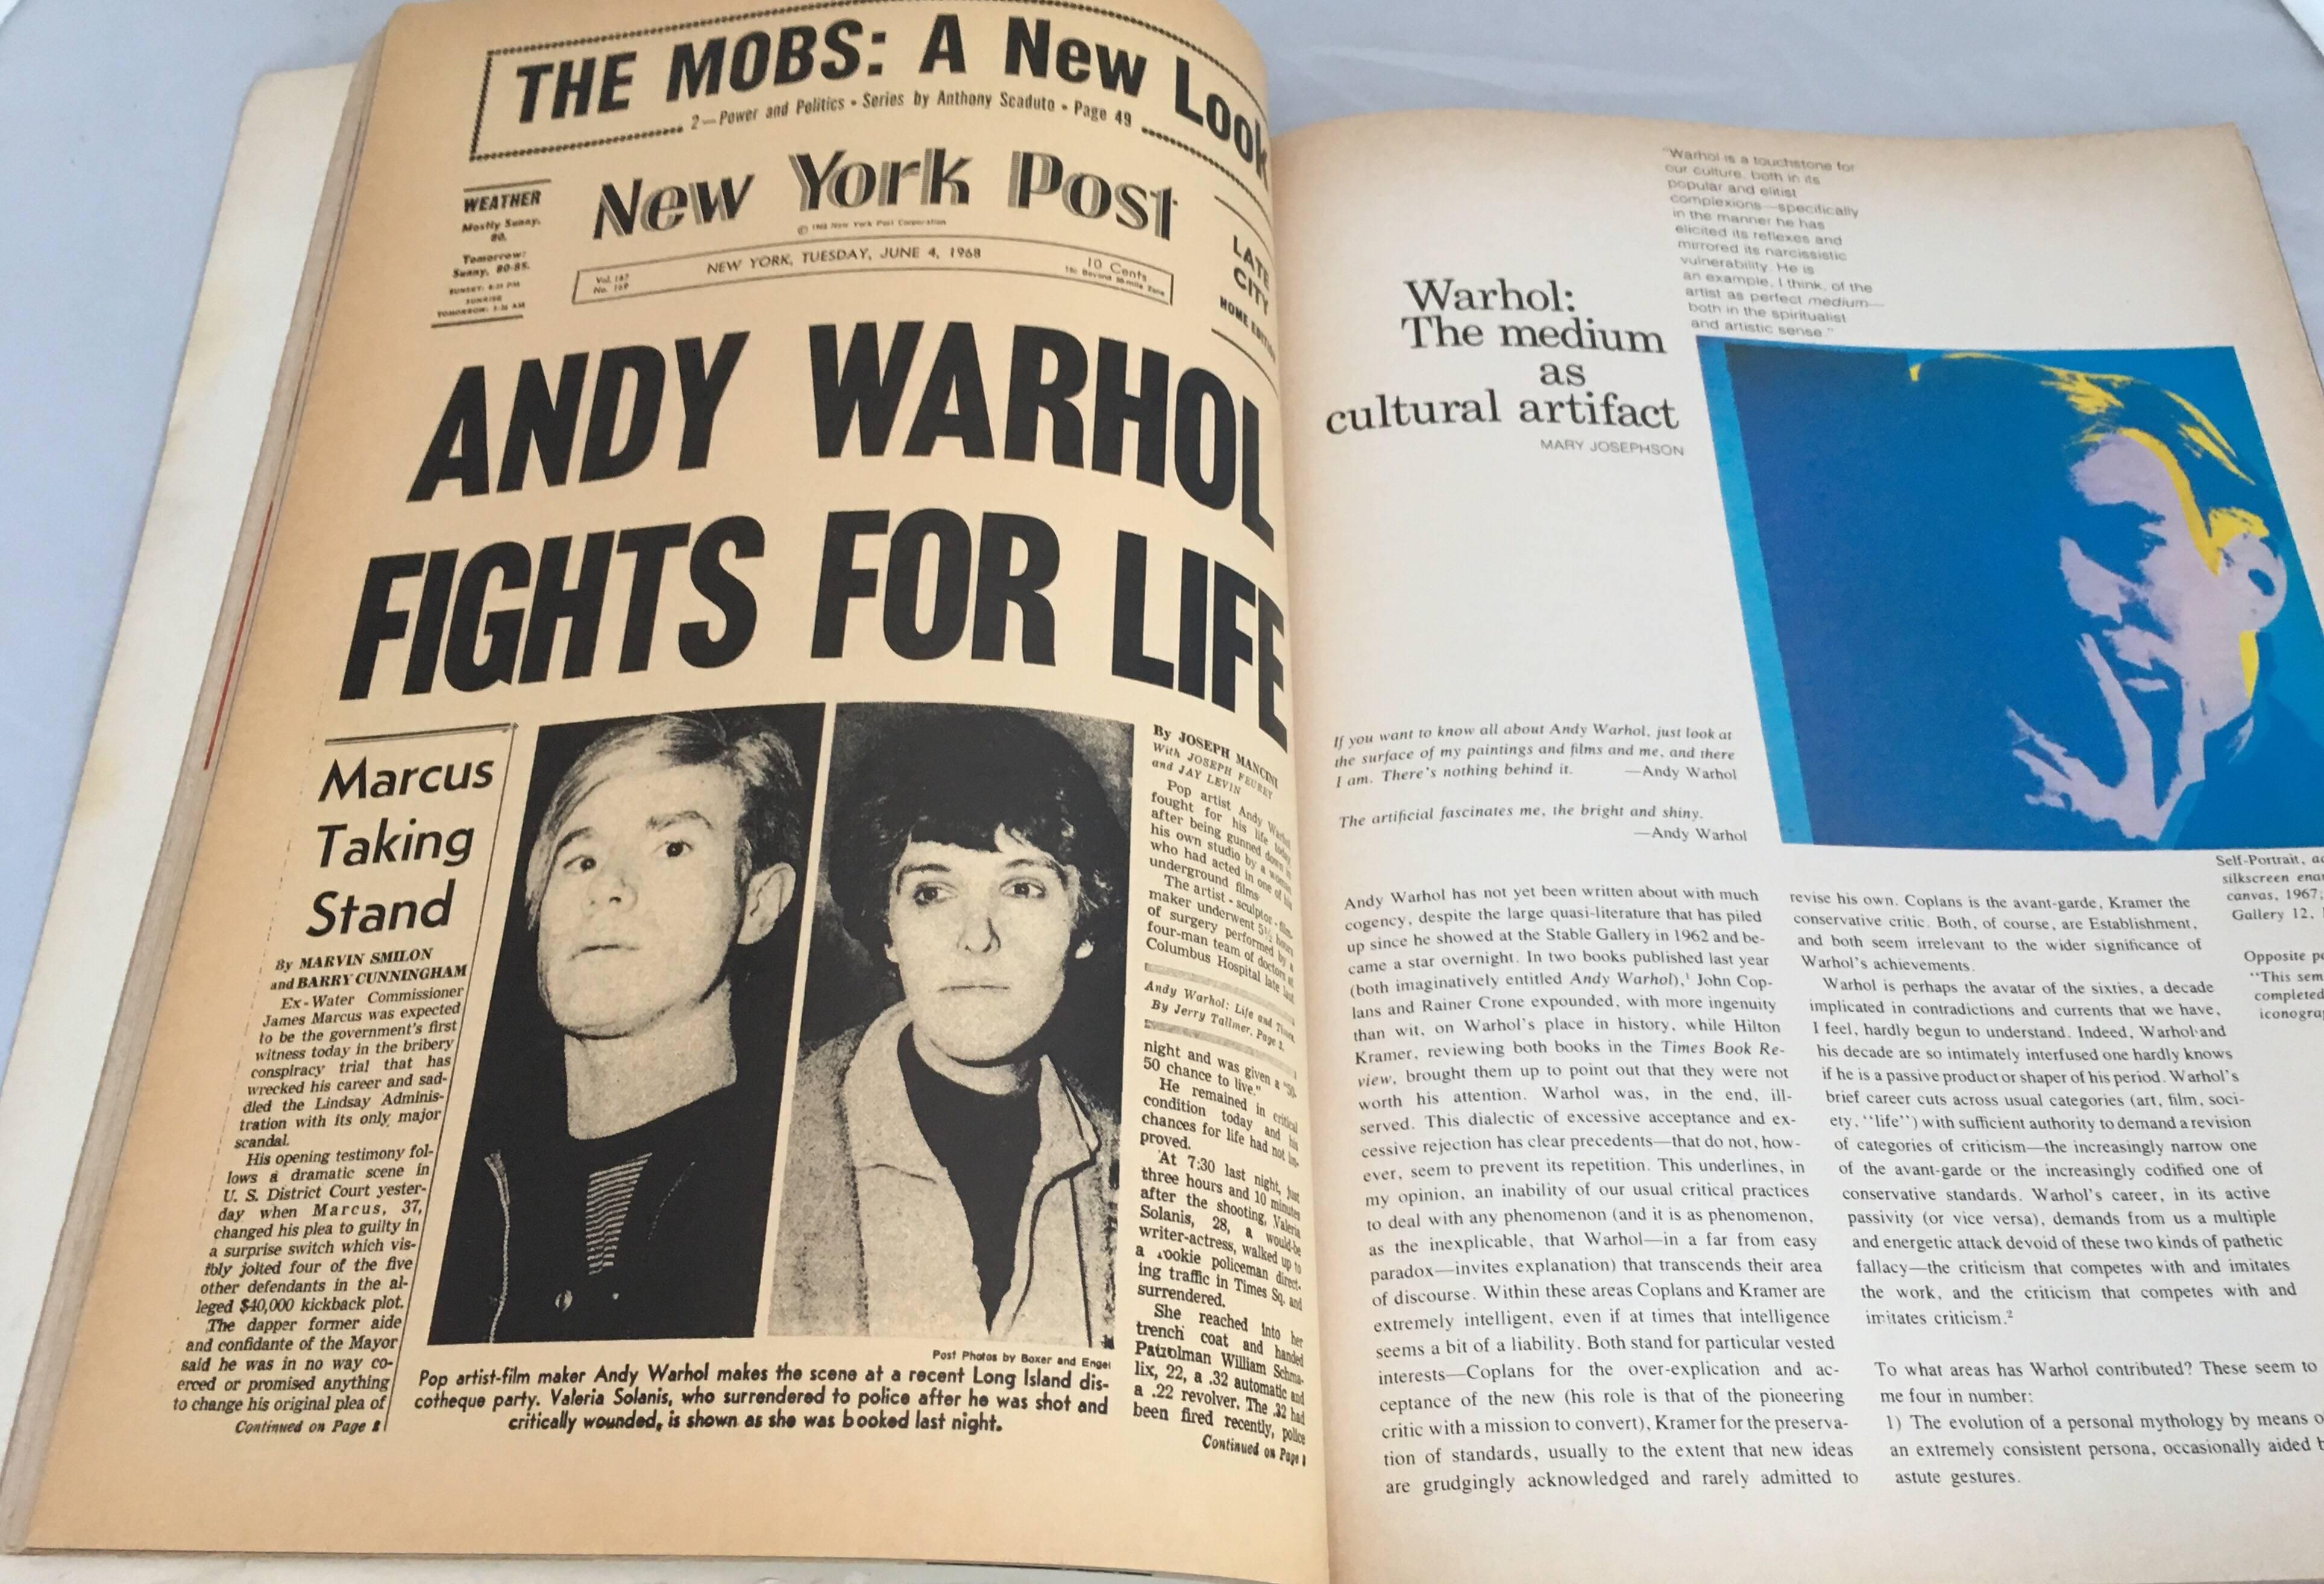 Andy Warhol issue of Art in America magazine, featuring four articles on the artist (